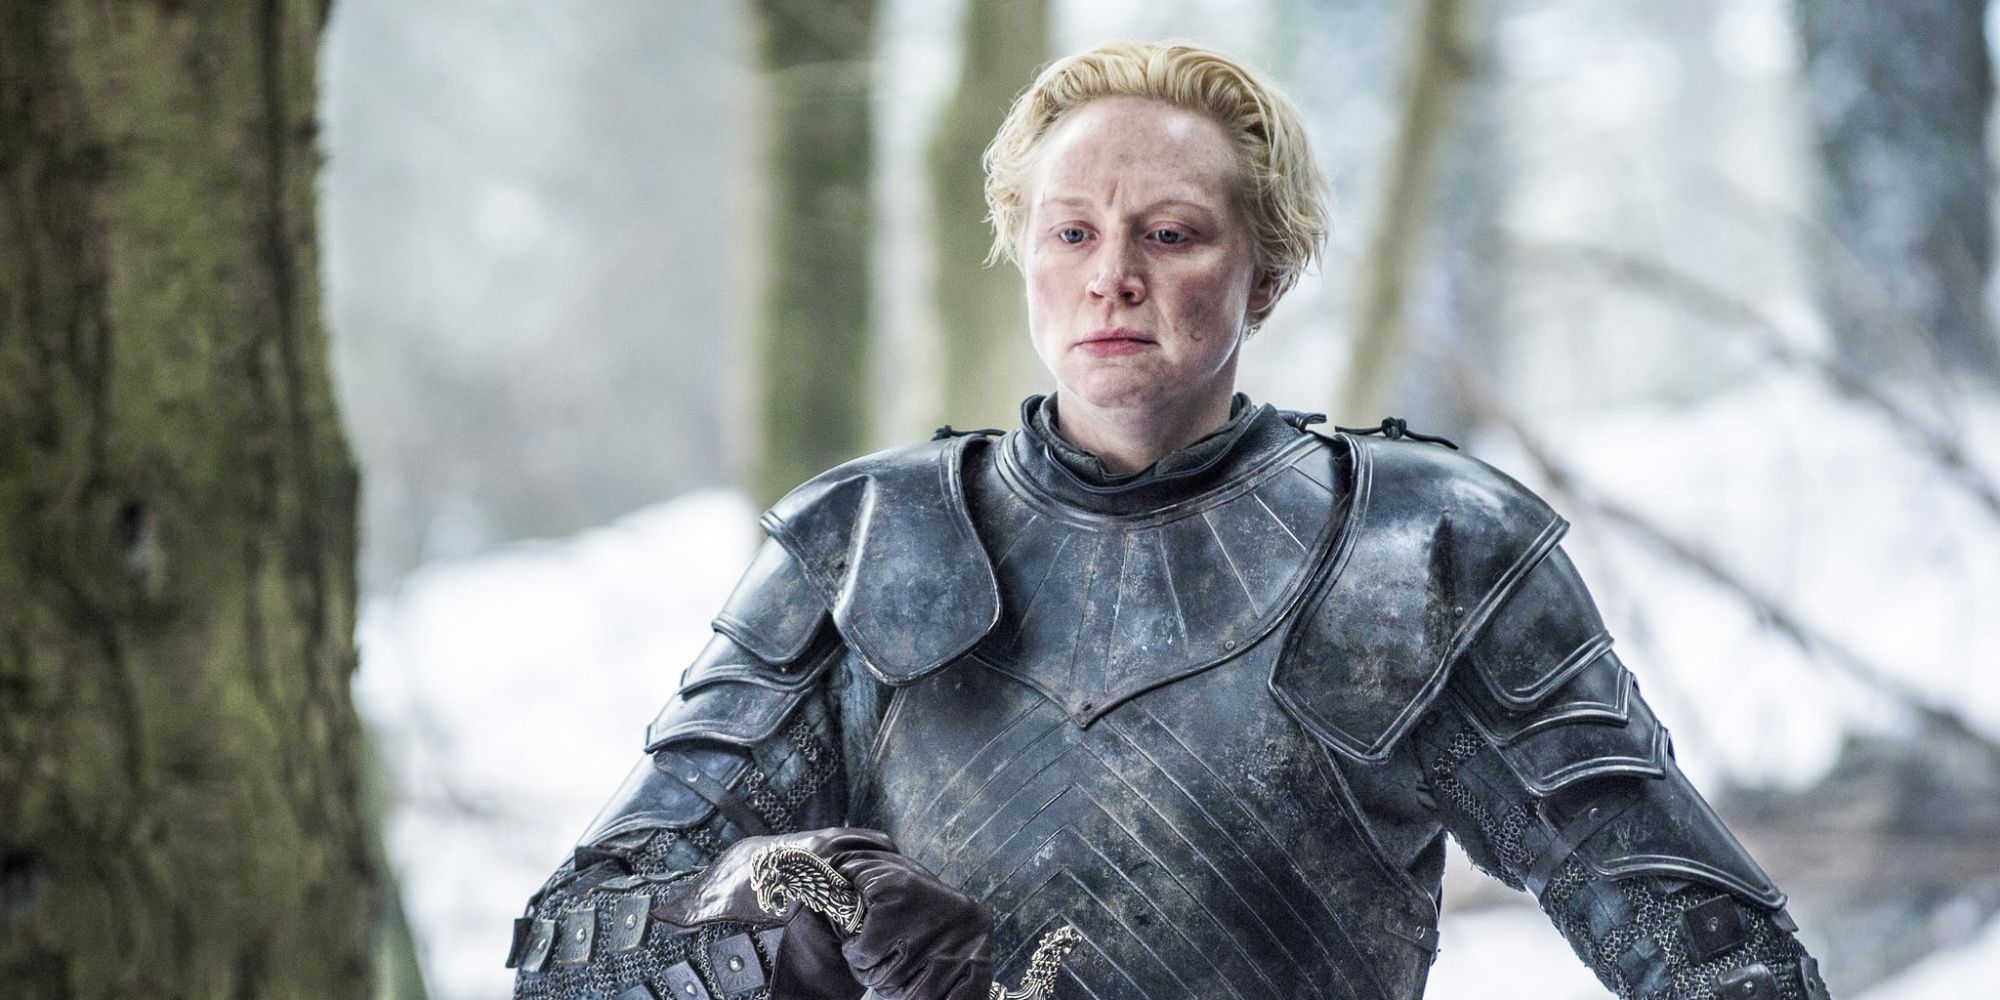 brienne of tarth from game of thrones